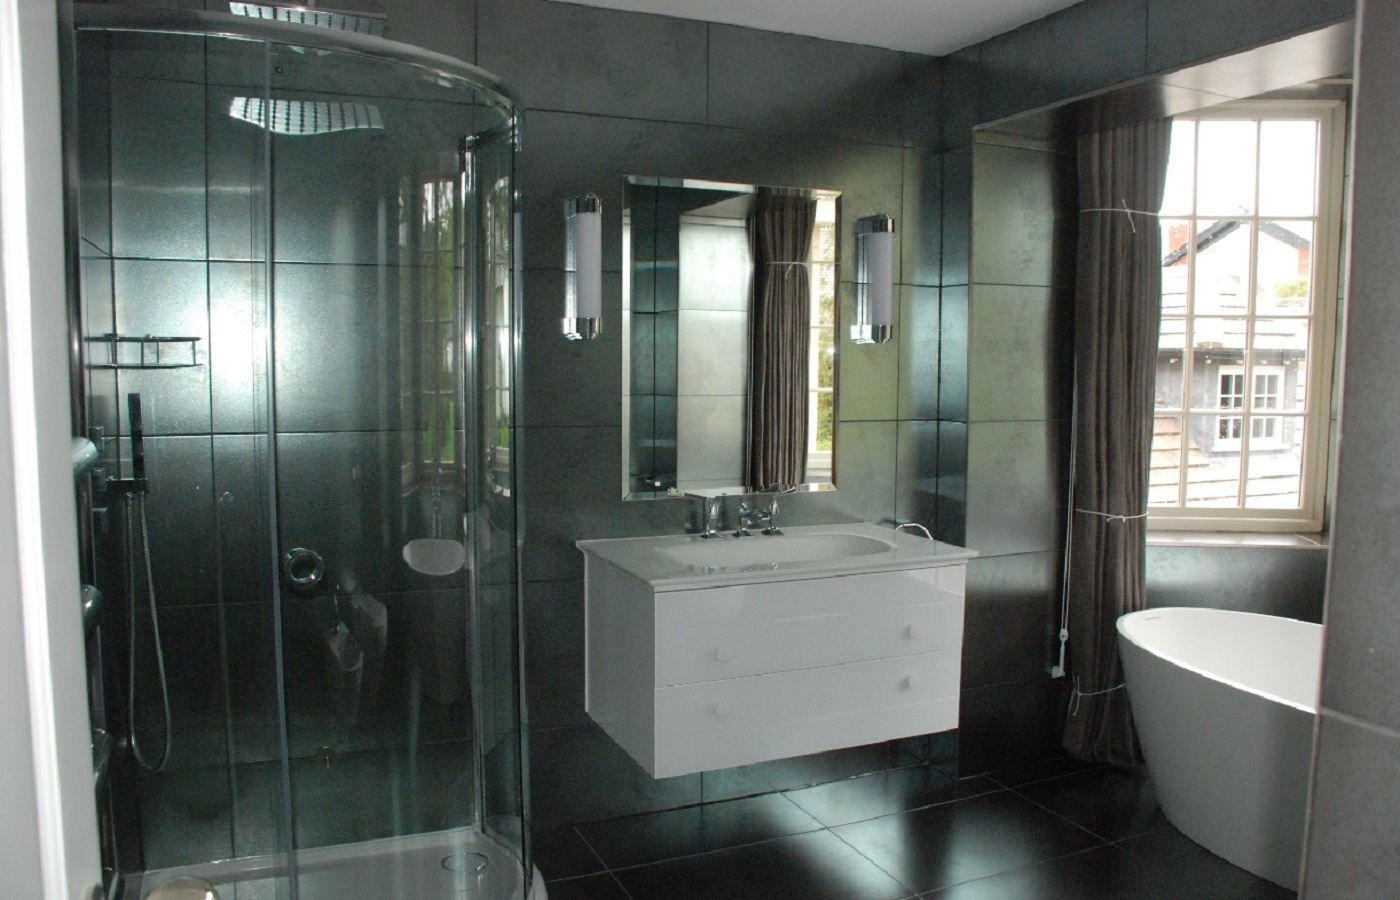 A view of the bath, sink and shower cubicle in a black tiled ensuite bathroom.